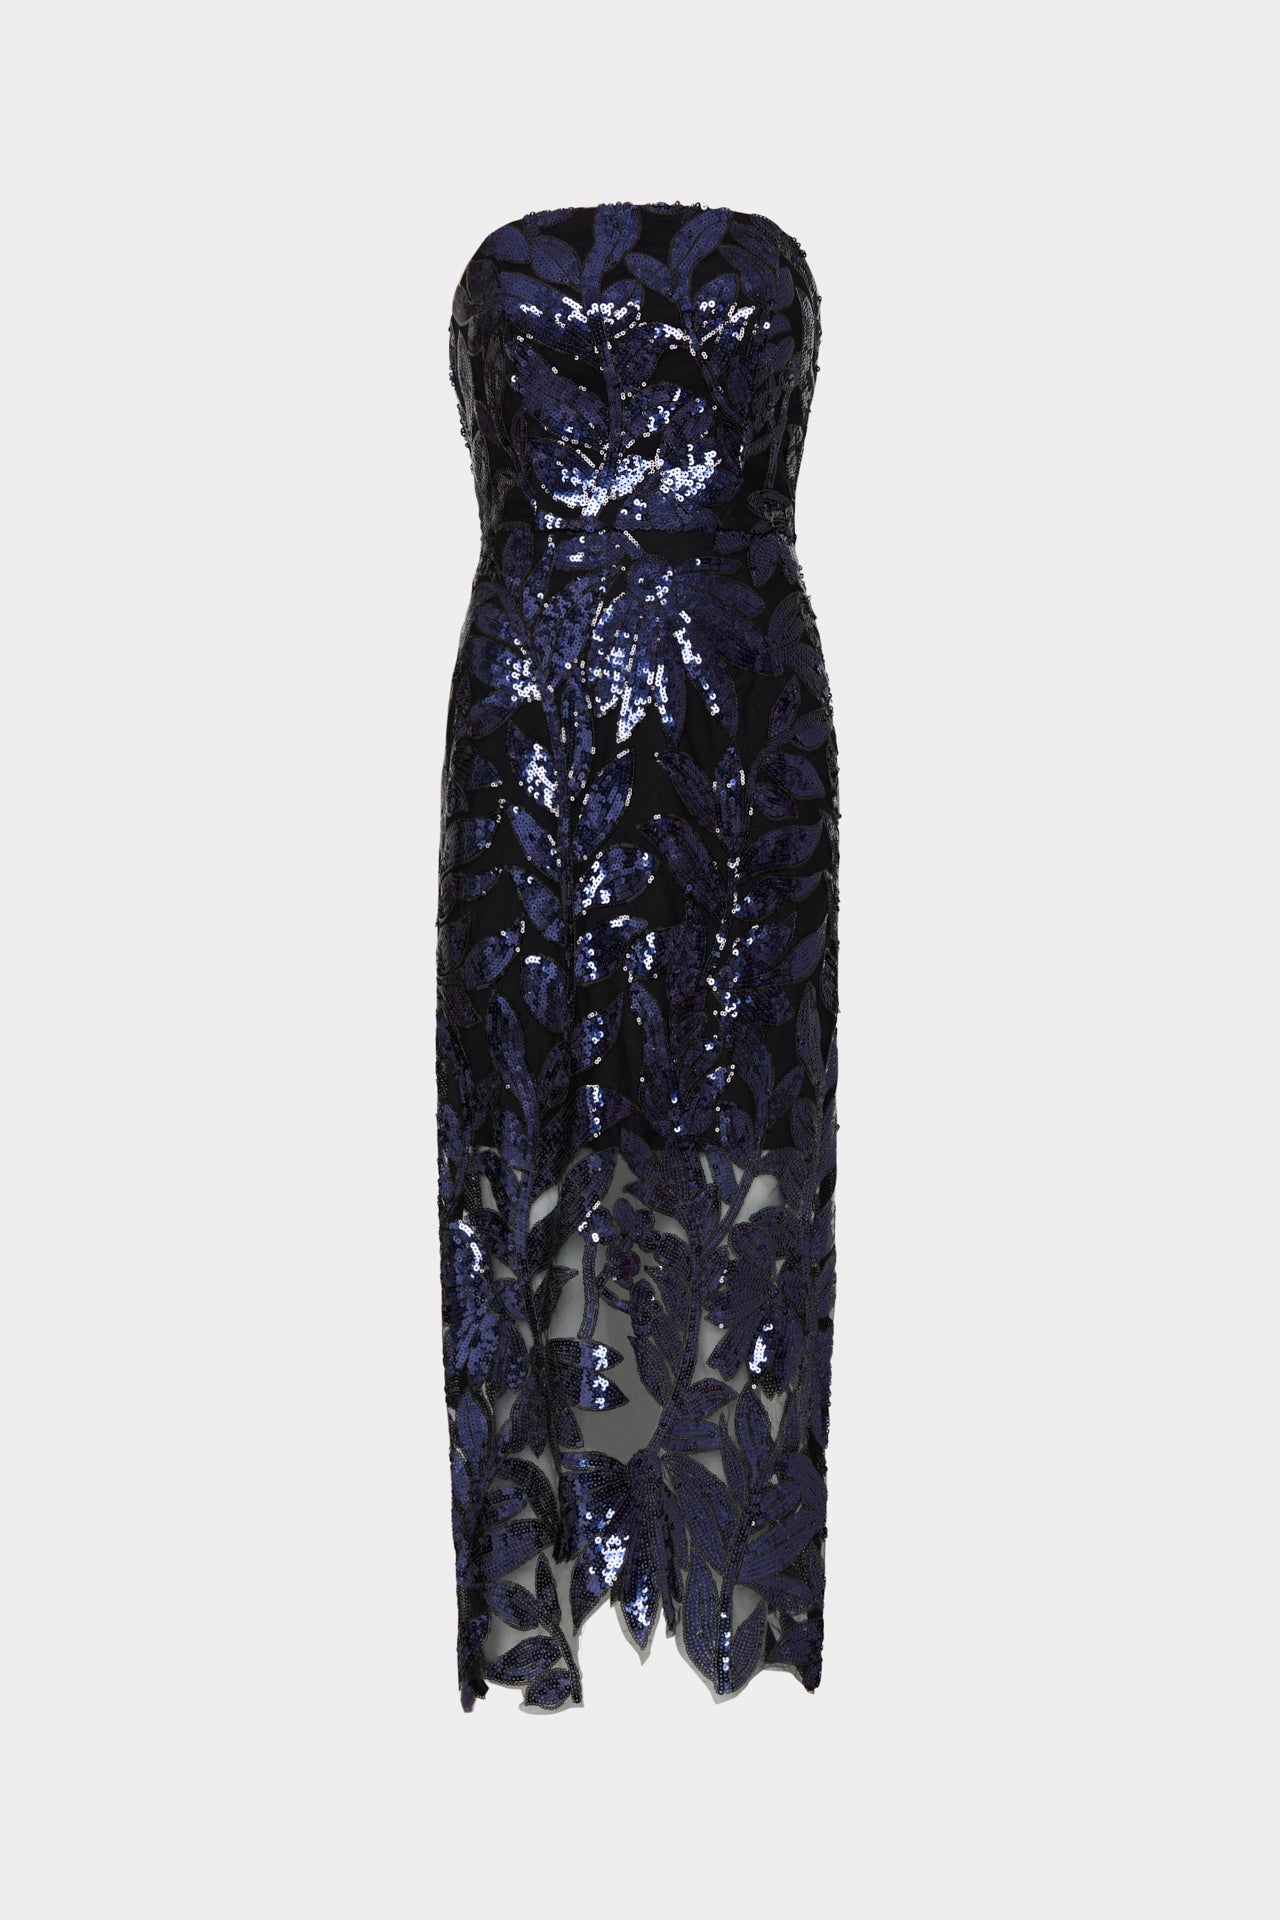 Kait Floral Sequins Dress in Navy - MILLY in Navy | MILLY